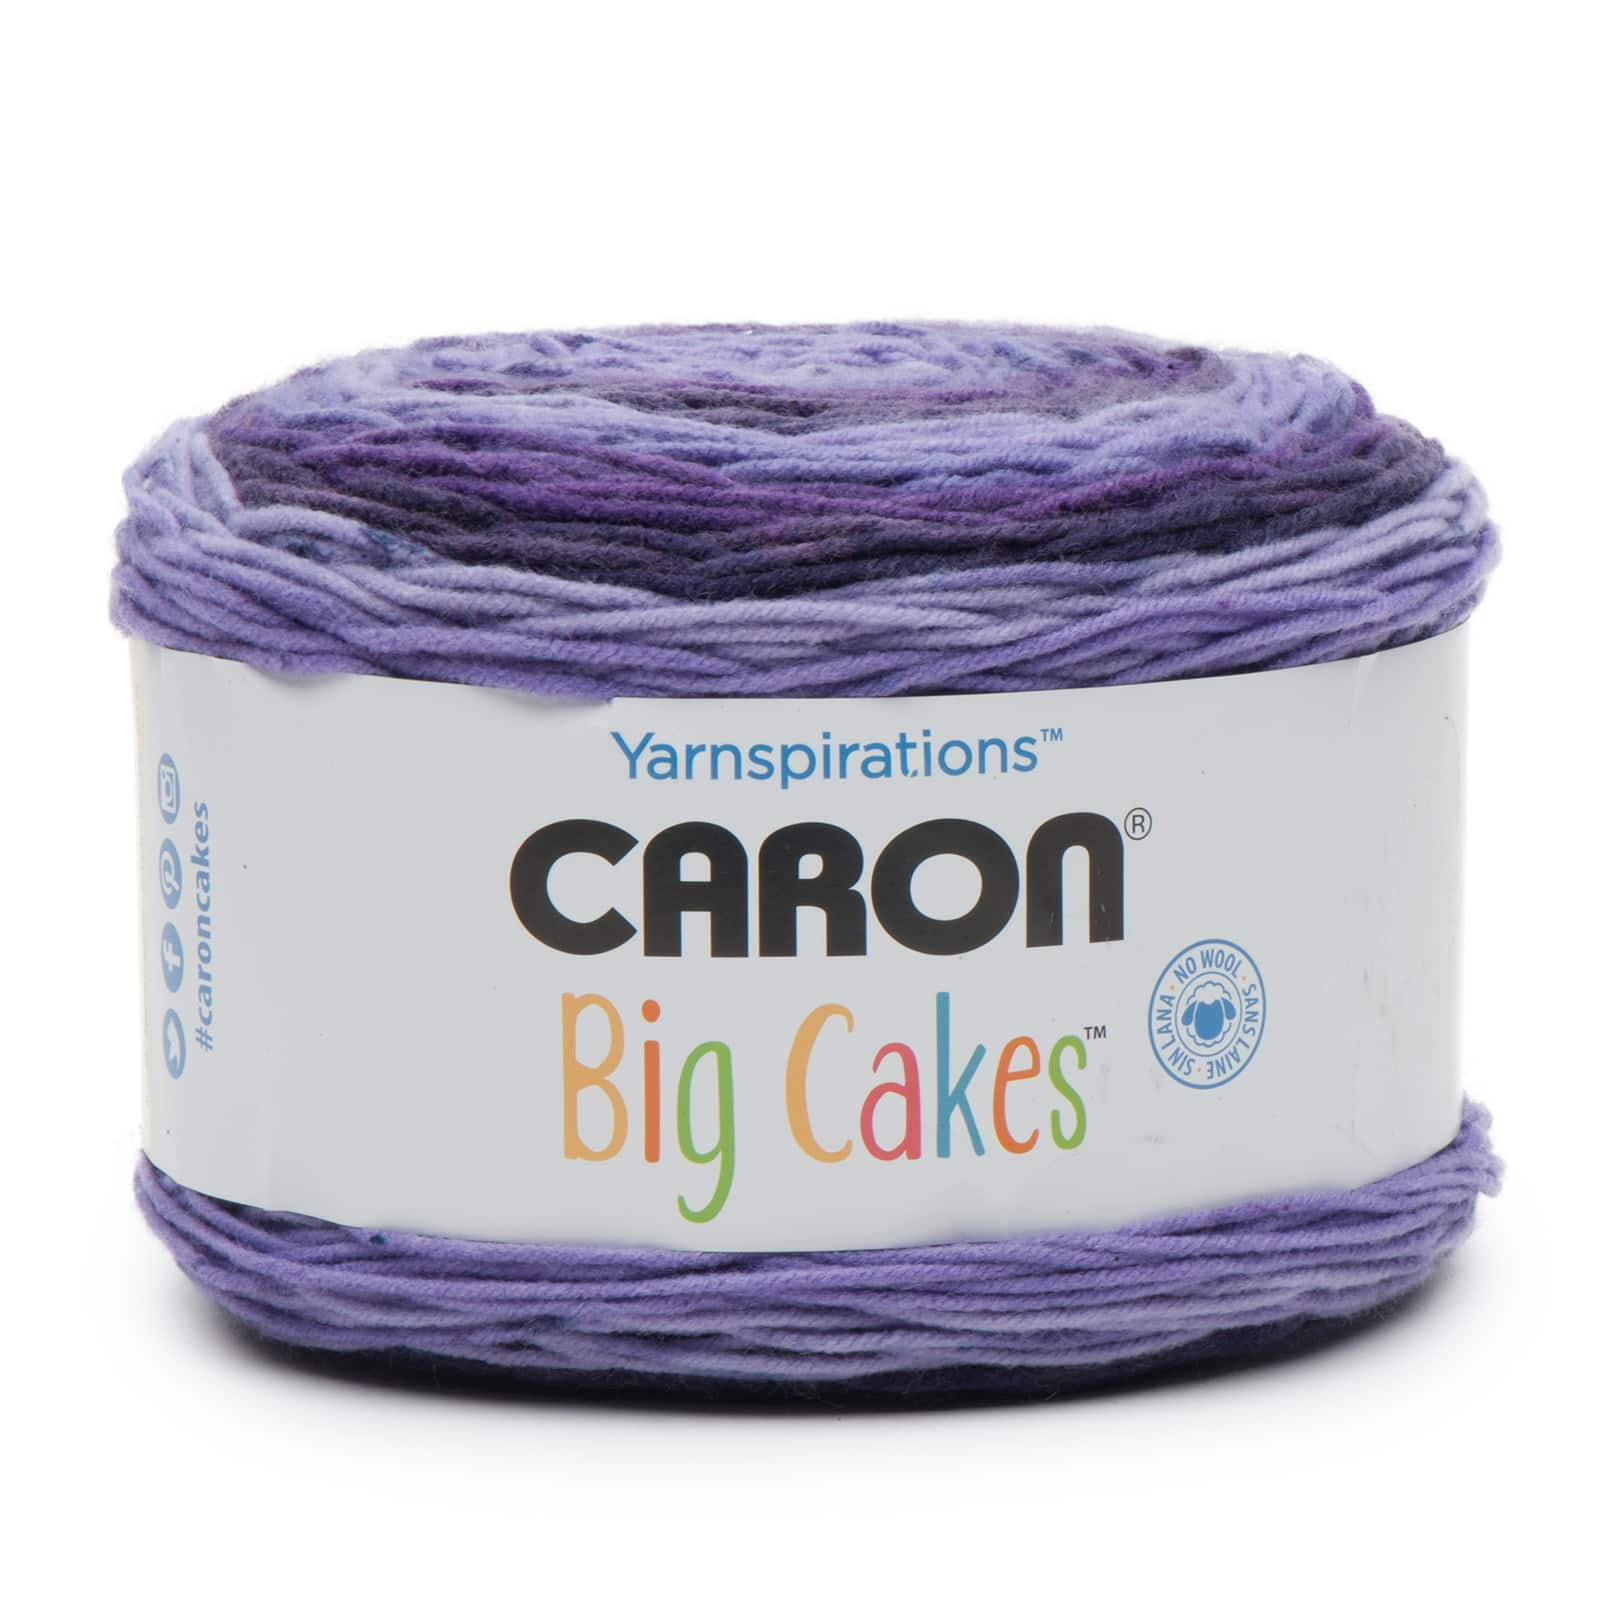 Caron Cakes + Stitch N Win Virtual Showcase with Moogly and Marly